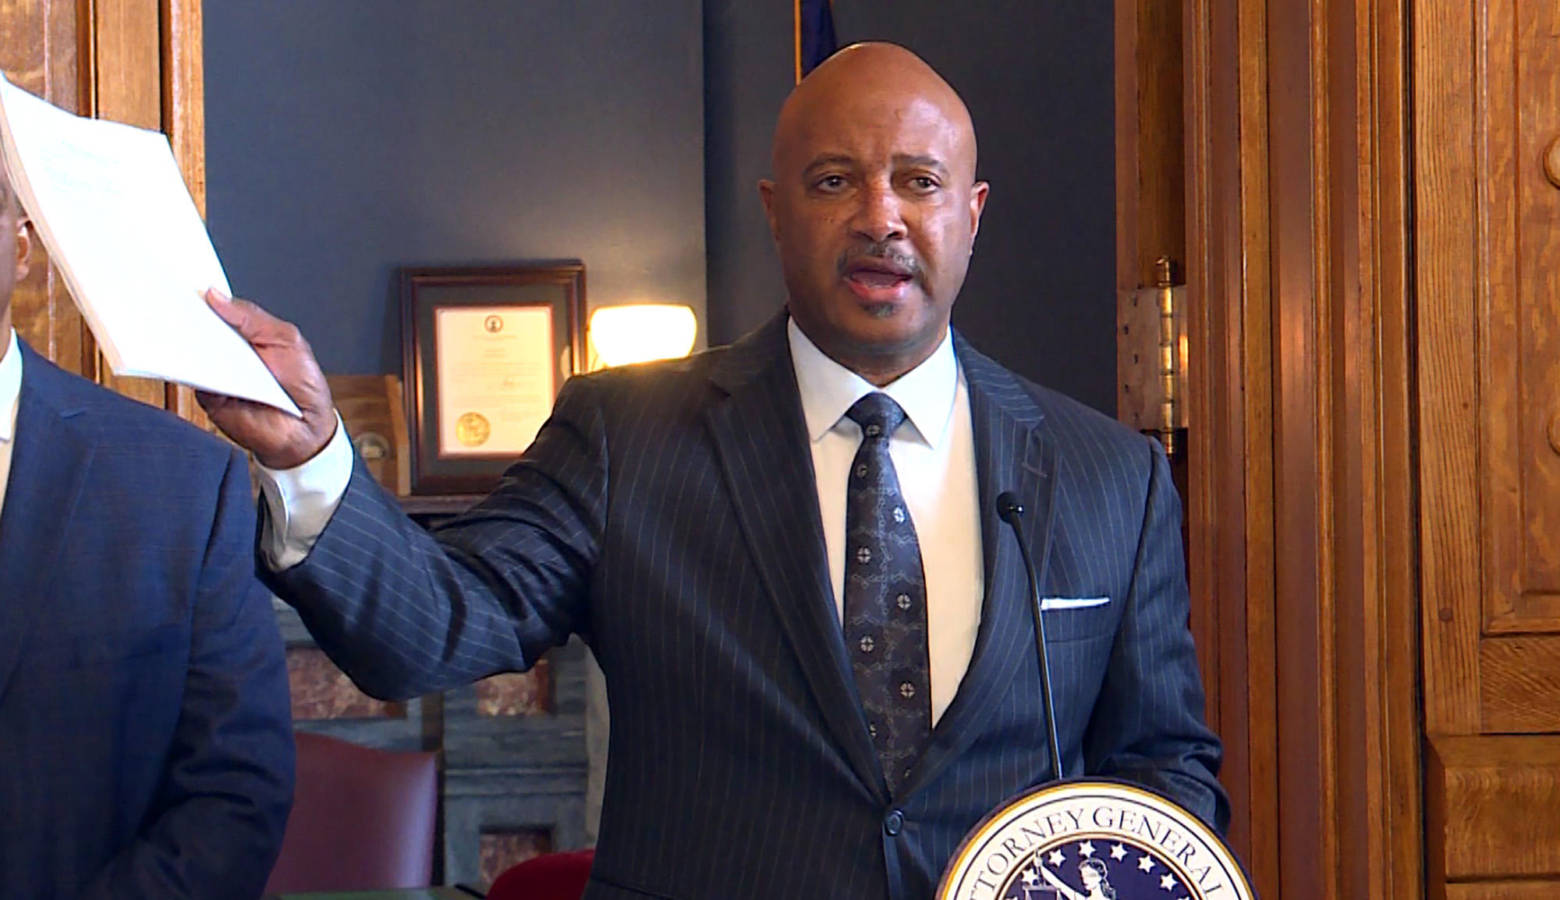 Attorney General Curtis Hill holds the 92 page complaint against opioid manufacturer Purdue Pharma during a November 2018 press conference. The recent decision in Oklahoma against Johnson & Johnson alleged similar complaints. (Lauren Chapman/IPB News)